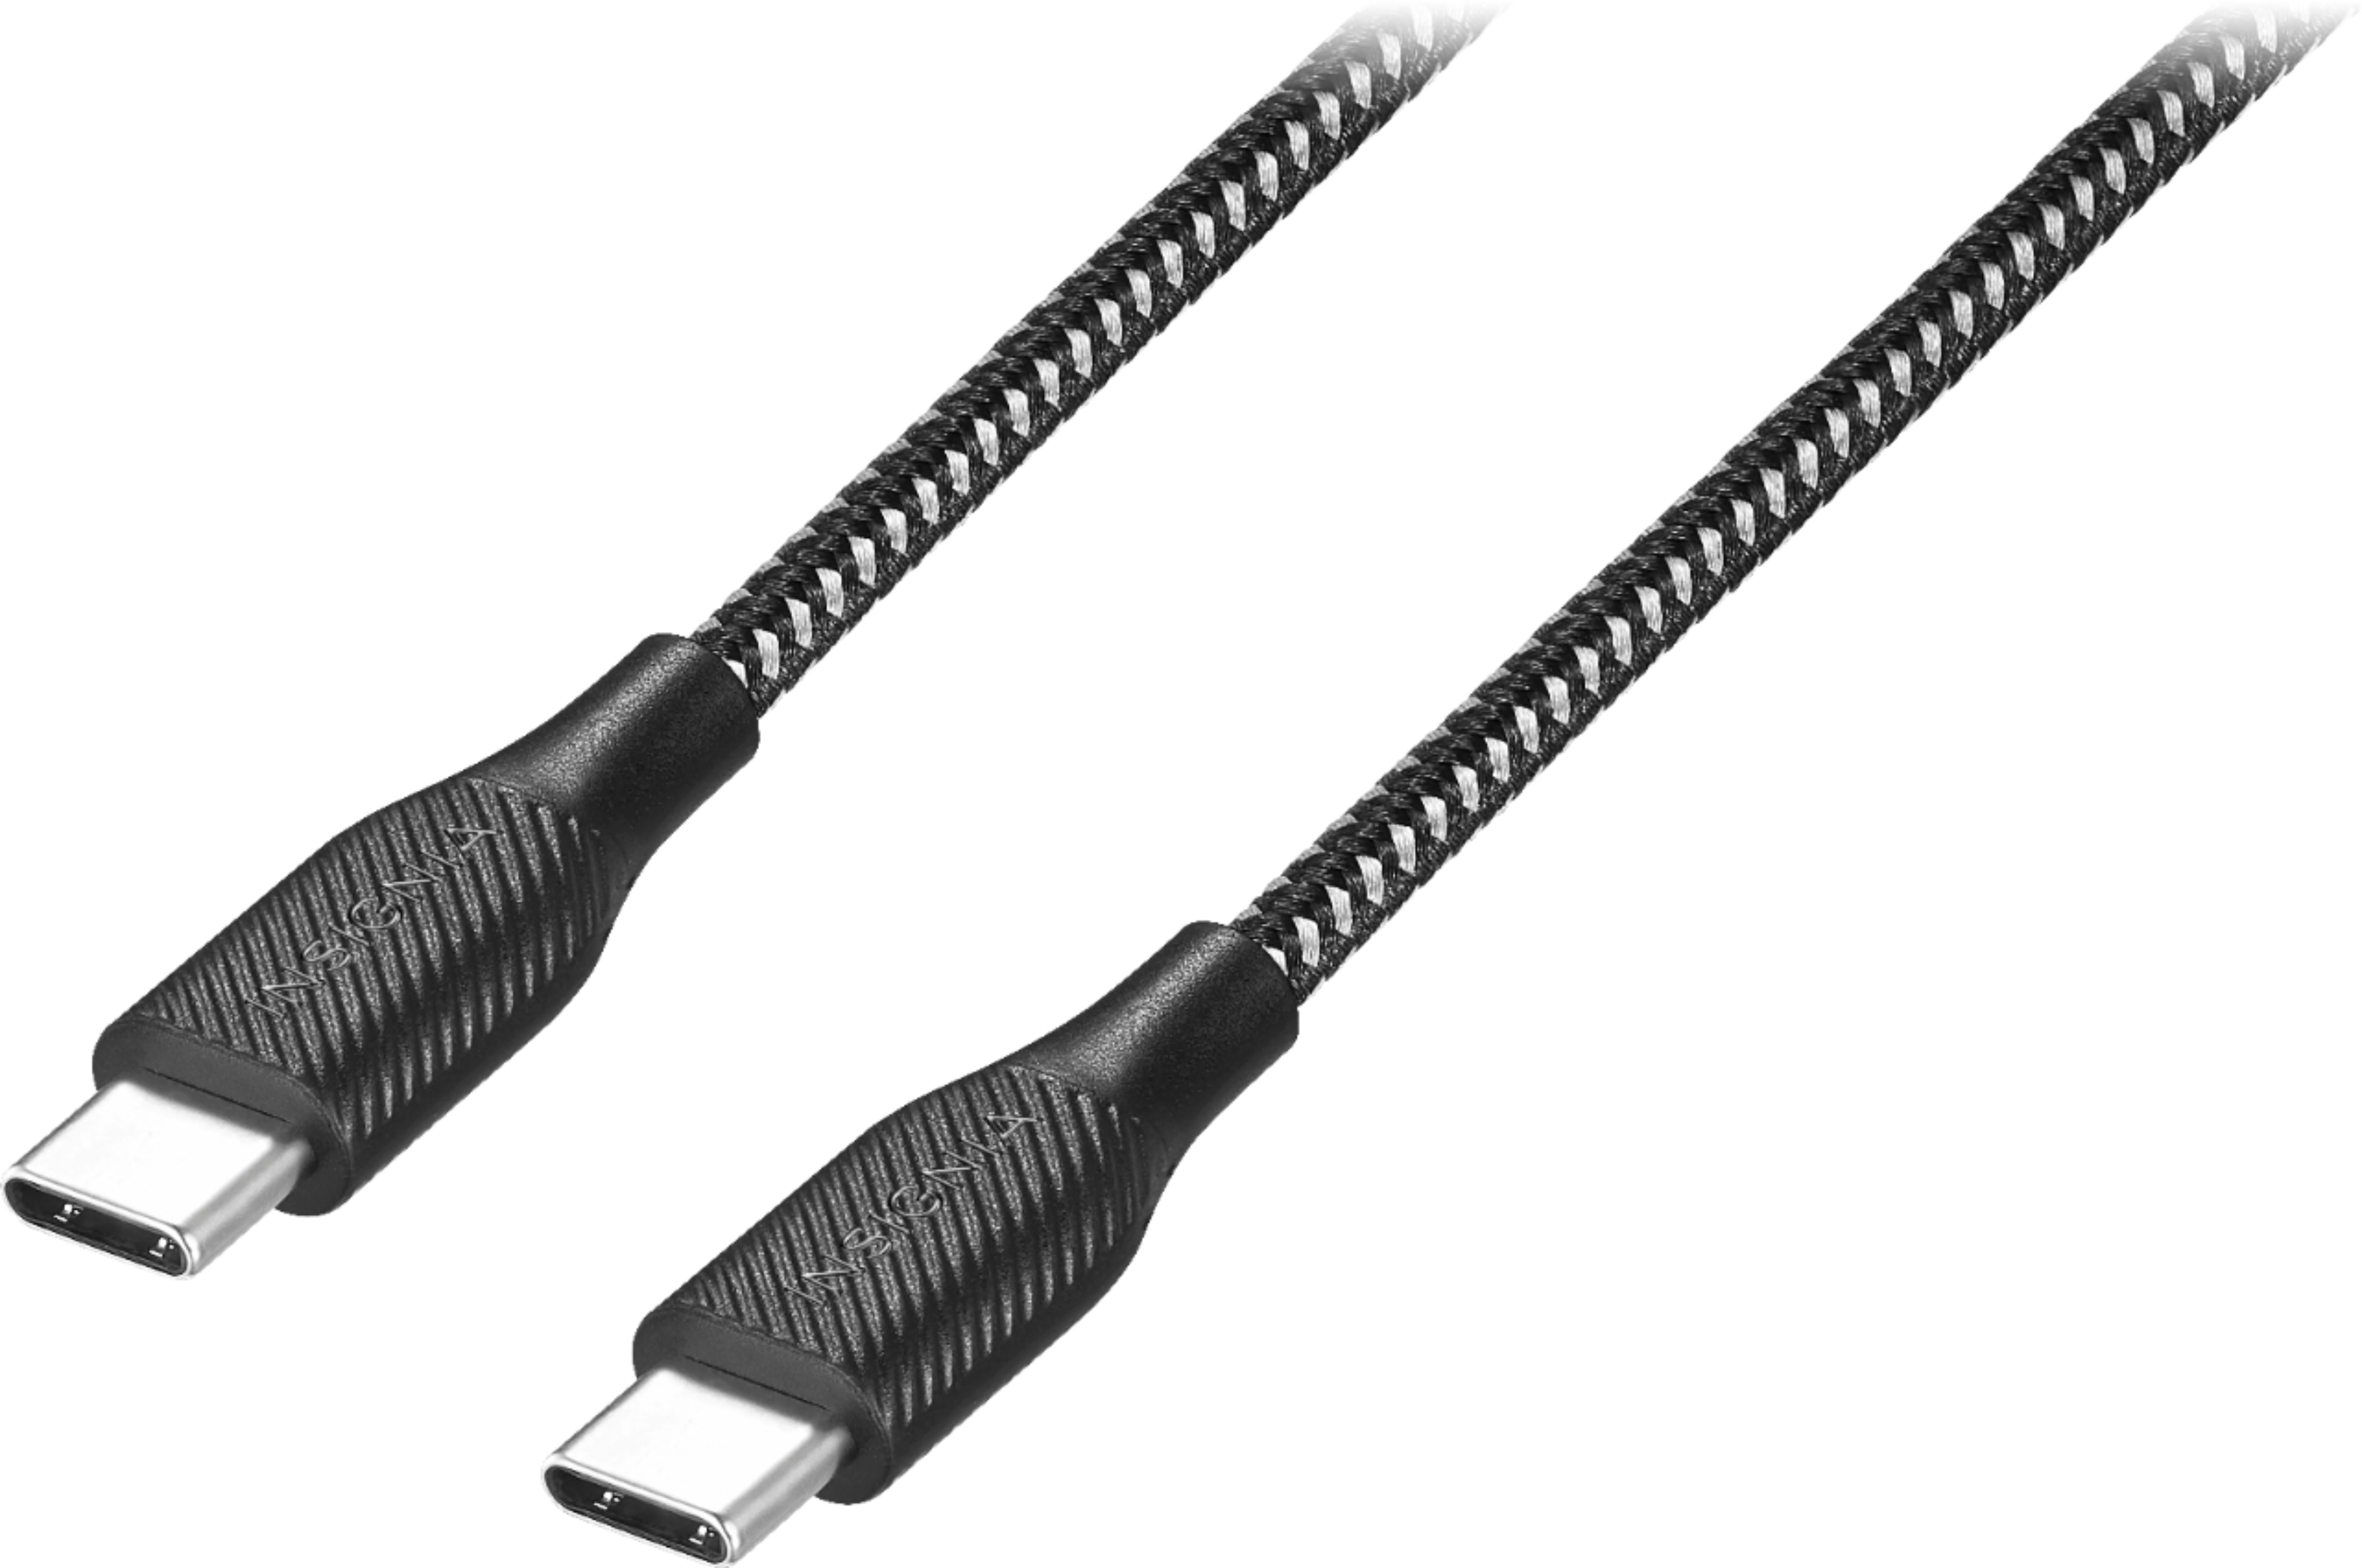 2m USB C Charging Cable Durable Cord 60W - USB-C Cables, Cables